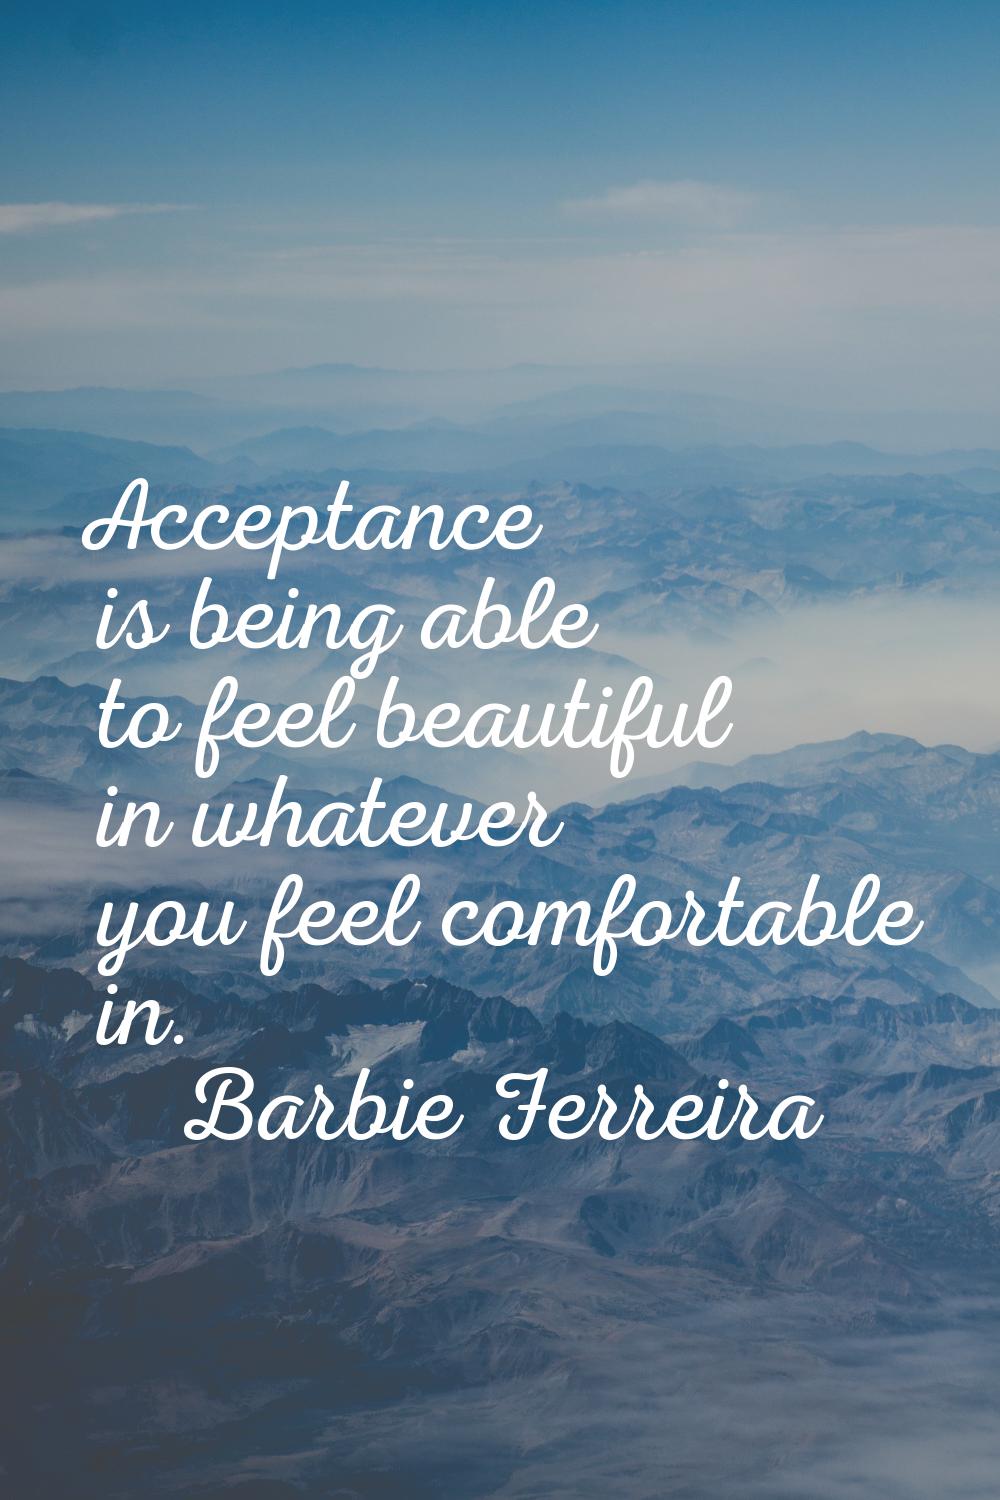 Acceptance is being able to feel beautiful in whatever you feel comfortable in.